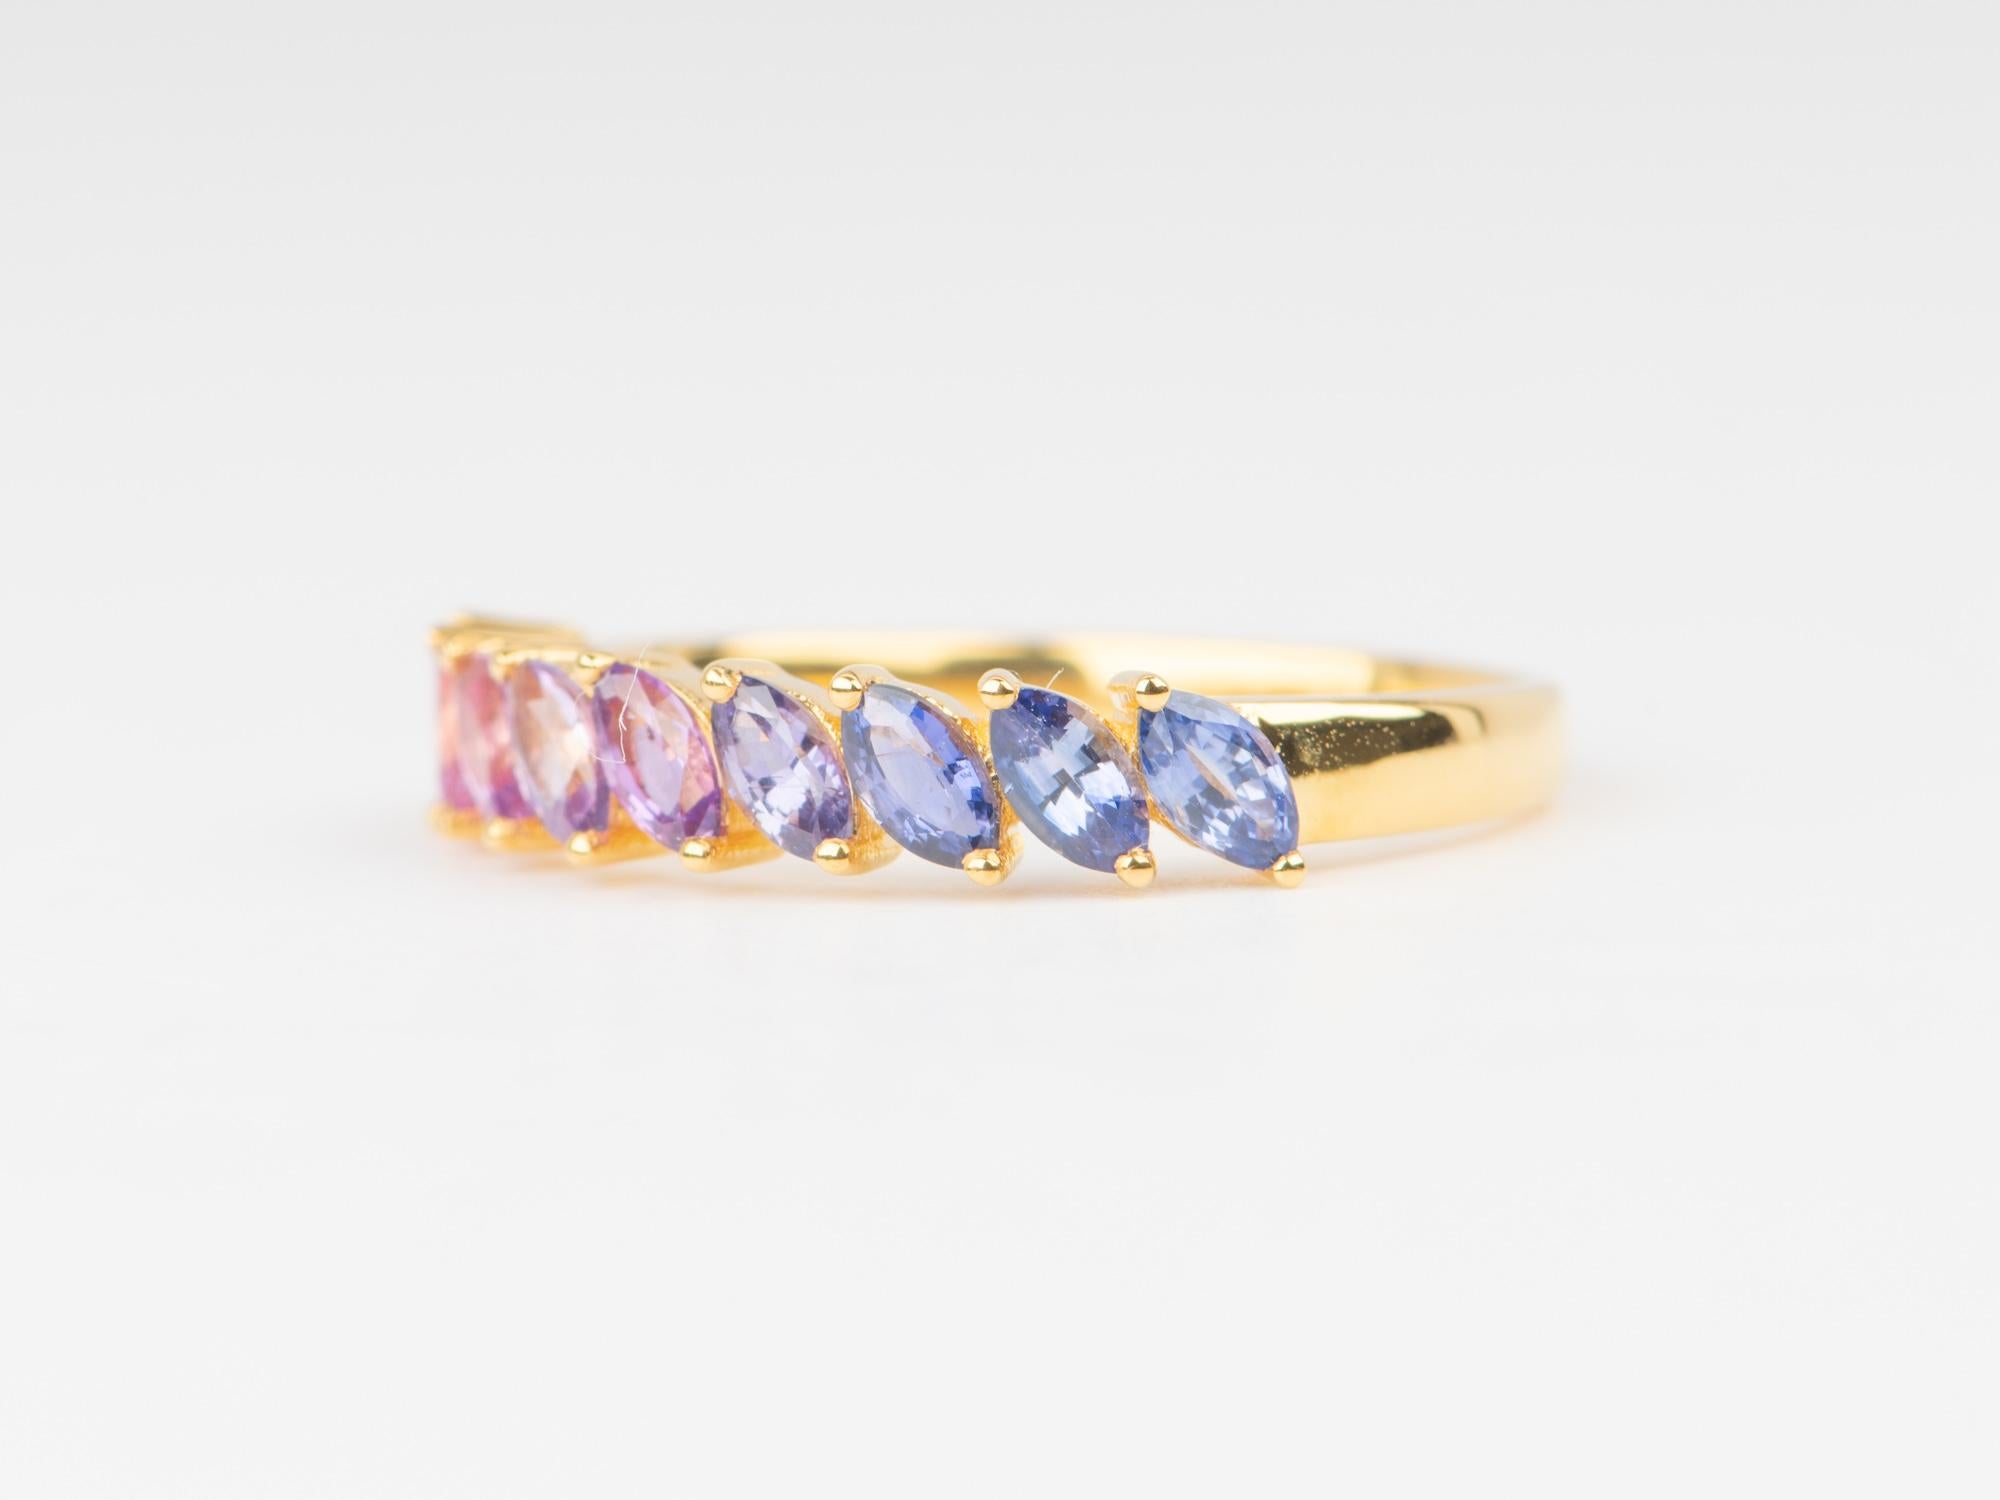 ♥ This is a stunning ring set with marquise sapphires ranging from pink, lavender, to purple, purplish blue colors
♥ These colors in sapphire are very difficult to find and match into an ombre shade. We only had enough stones to make one ring, not